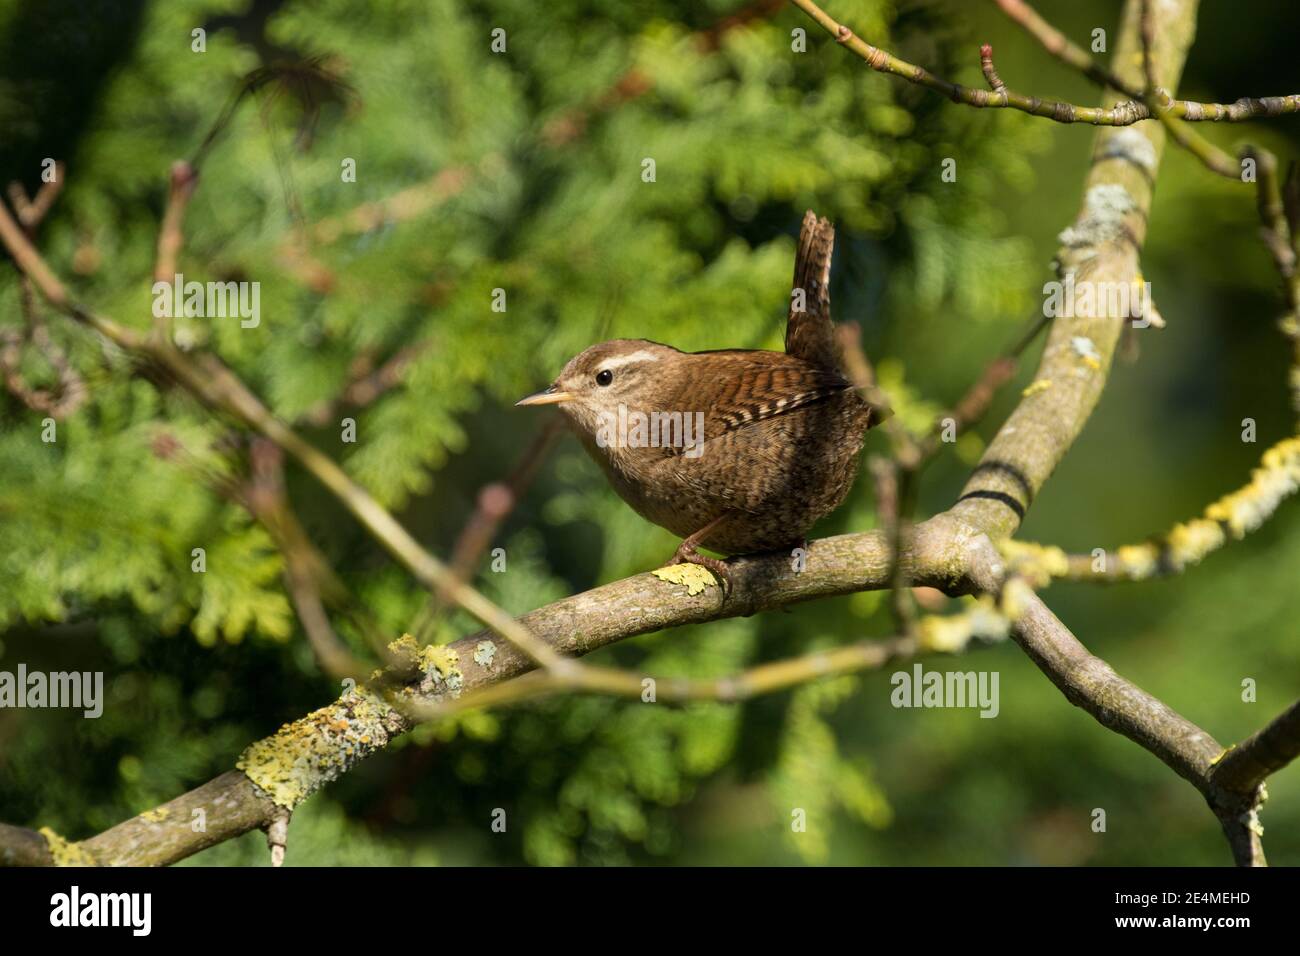 Dumpy plain brown Wren perched on a tree branch, Valley Gardens, Harrogate, North Yorkshire, England, UK. Stock Photo